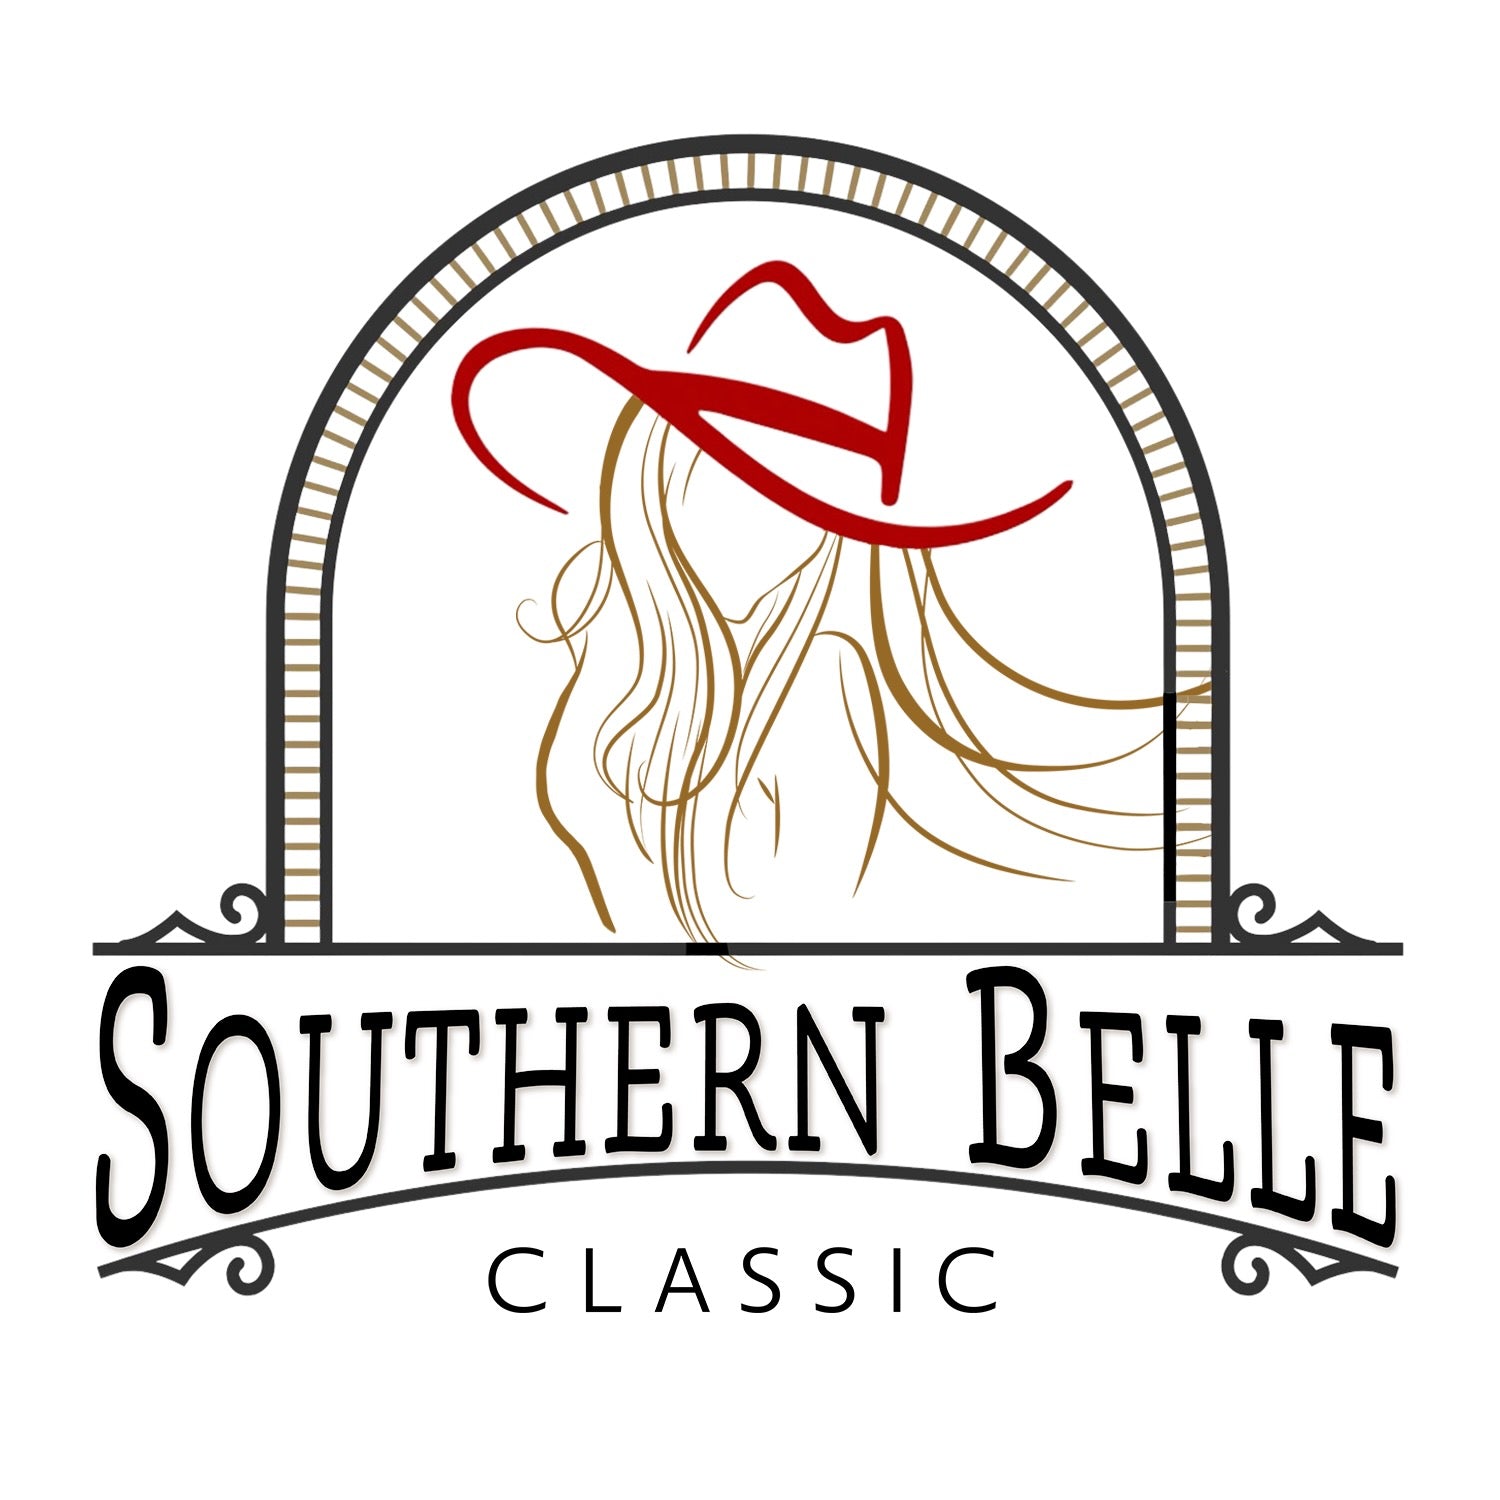 Southern Belle Classic